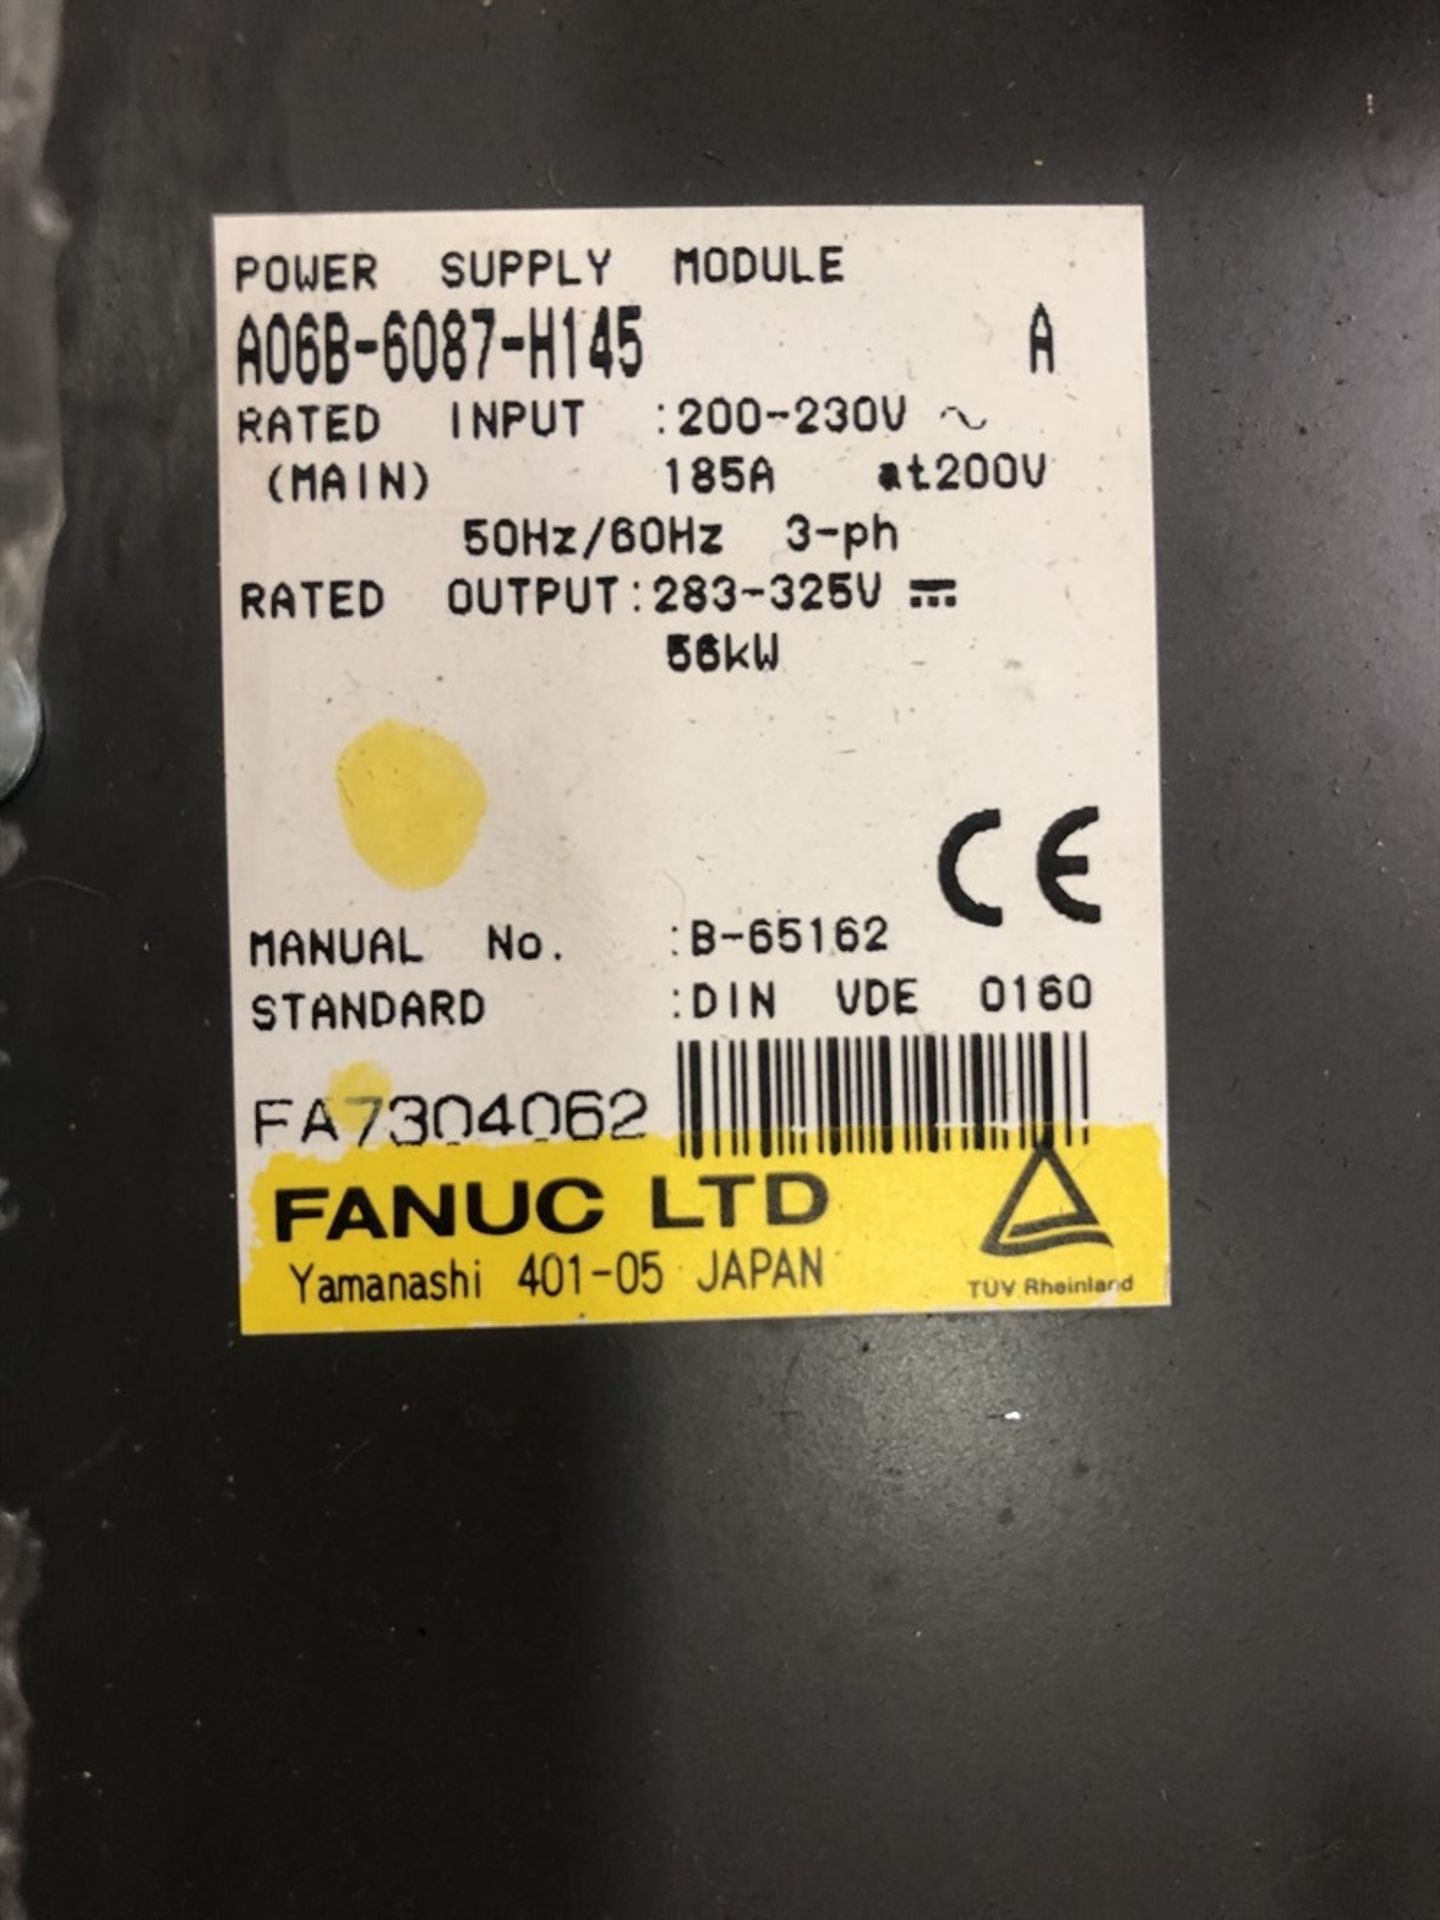 Lot Comprising (2) Fanuc A06B-6087-H145 Power Supply Modules, (17N) - Image 2 of 2